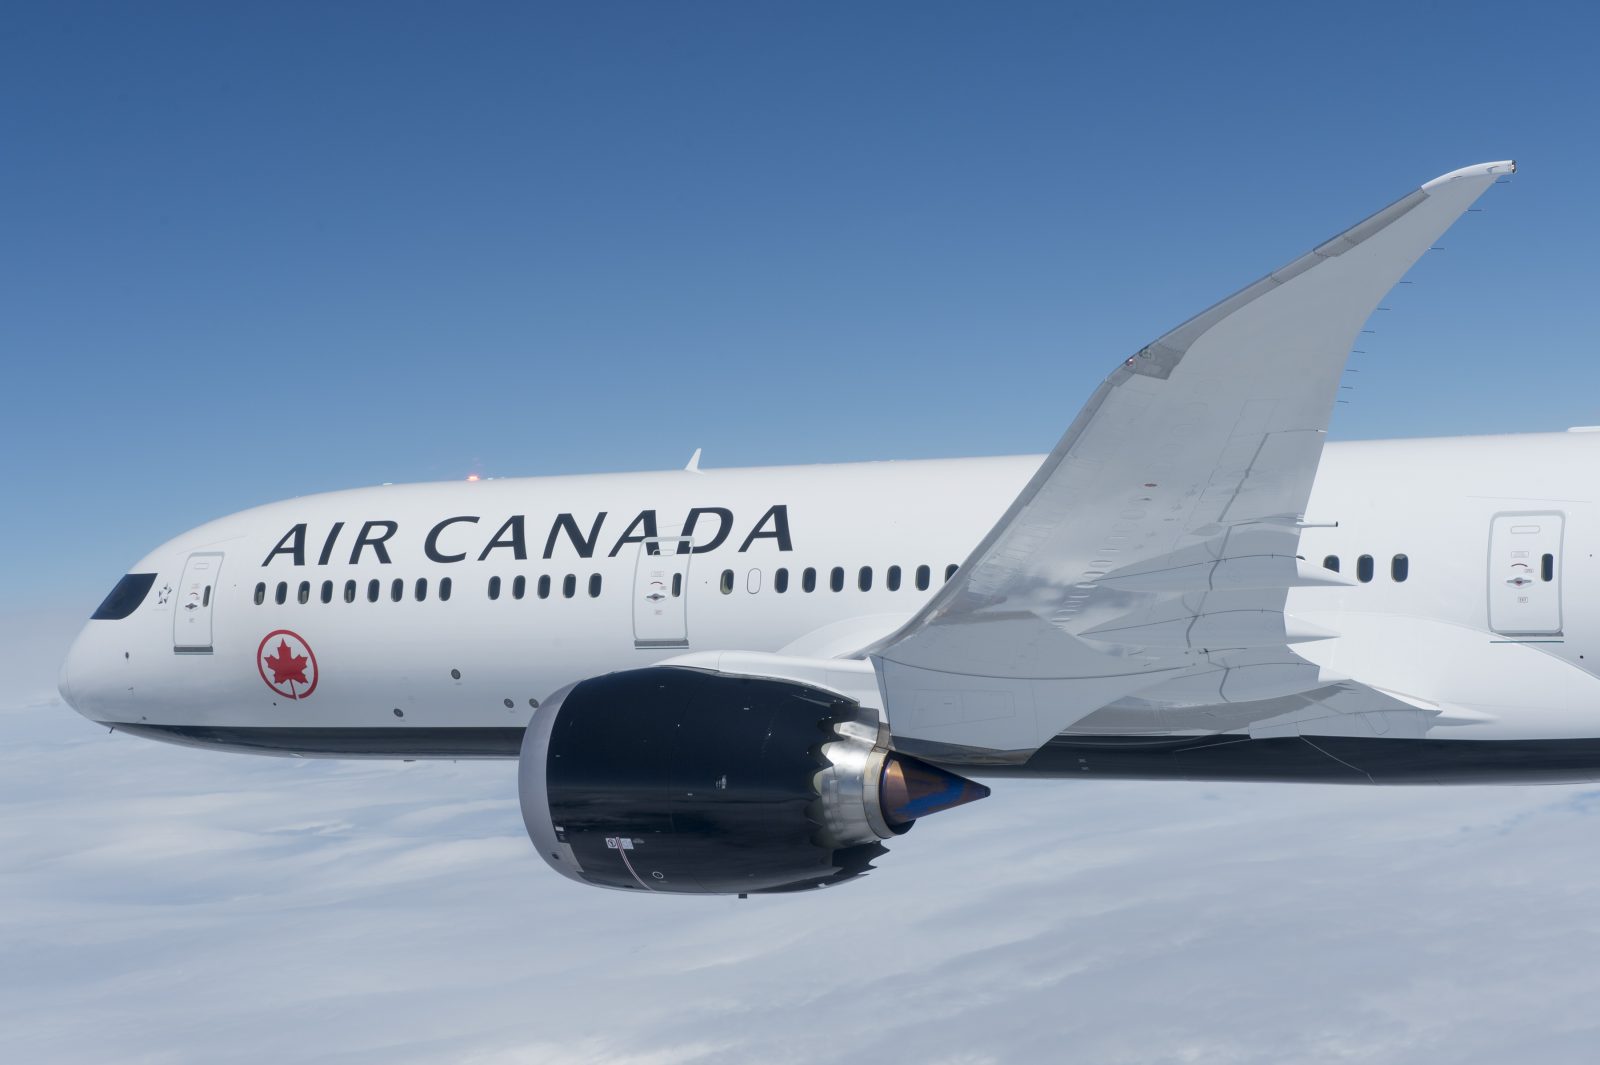 Air Canada is Recruting for a Type of Flight Attendant Currently Subject to a Human Rights Complaint